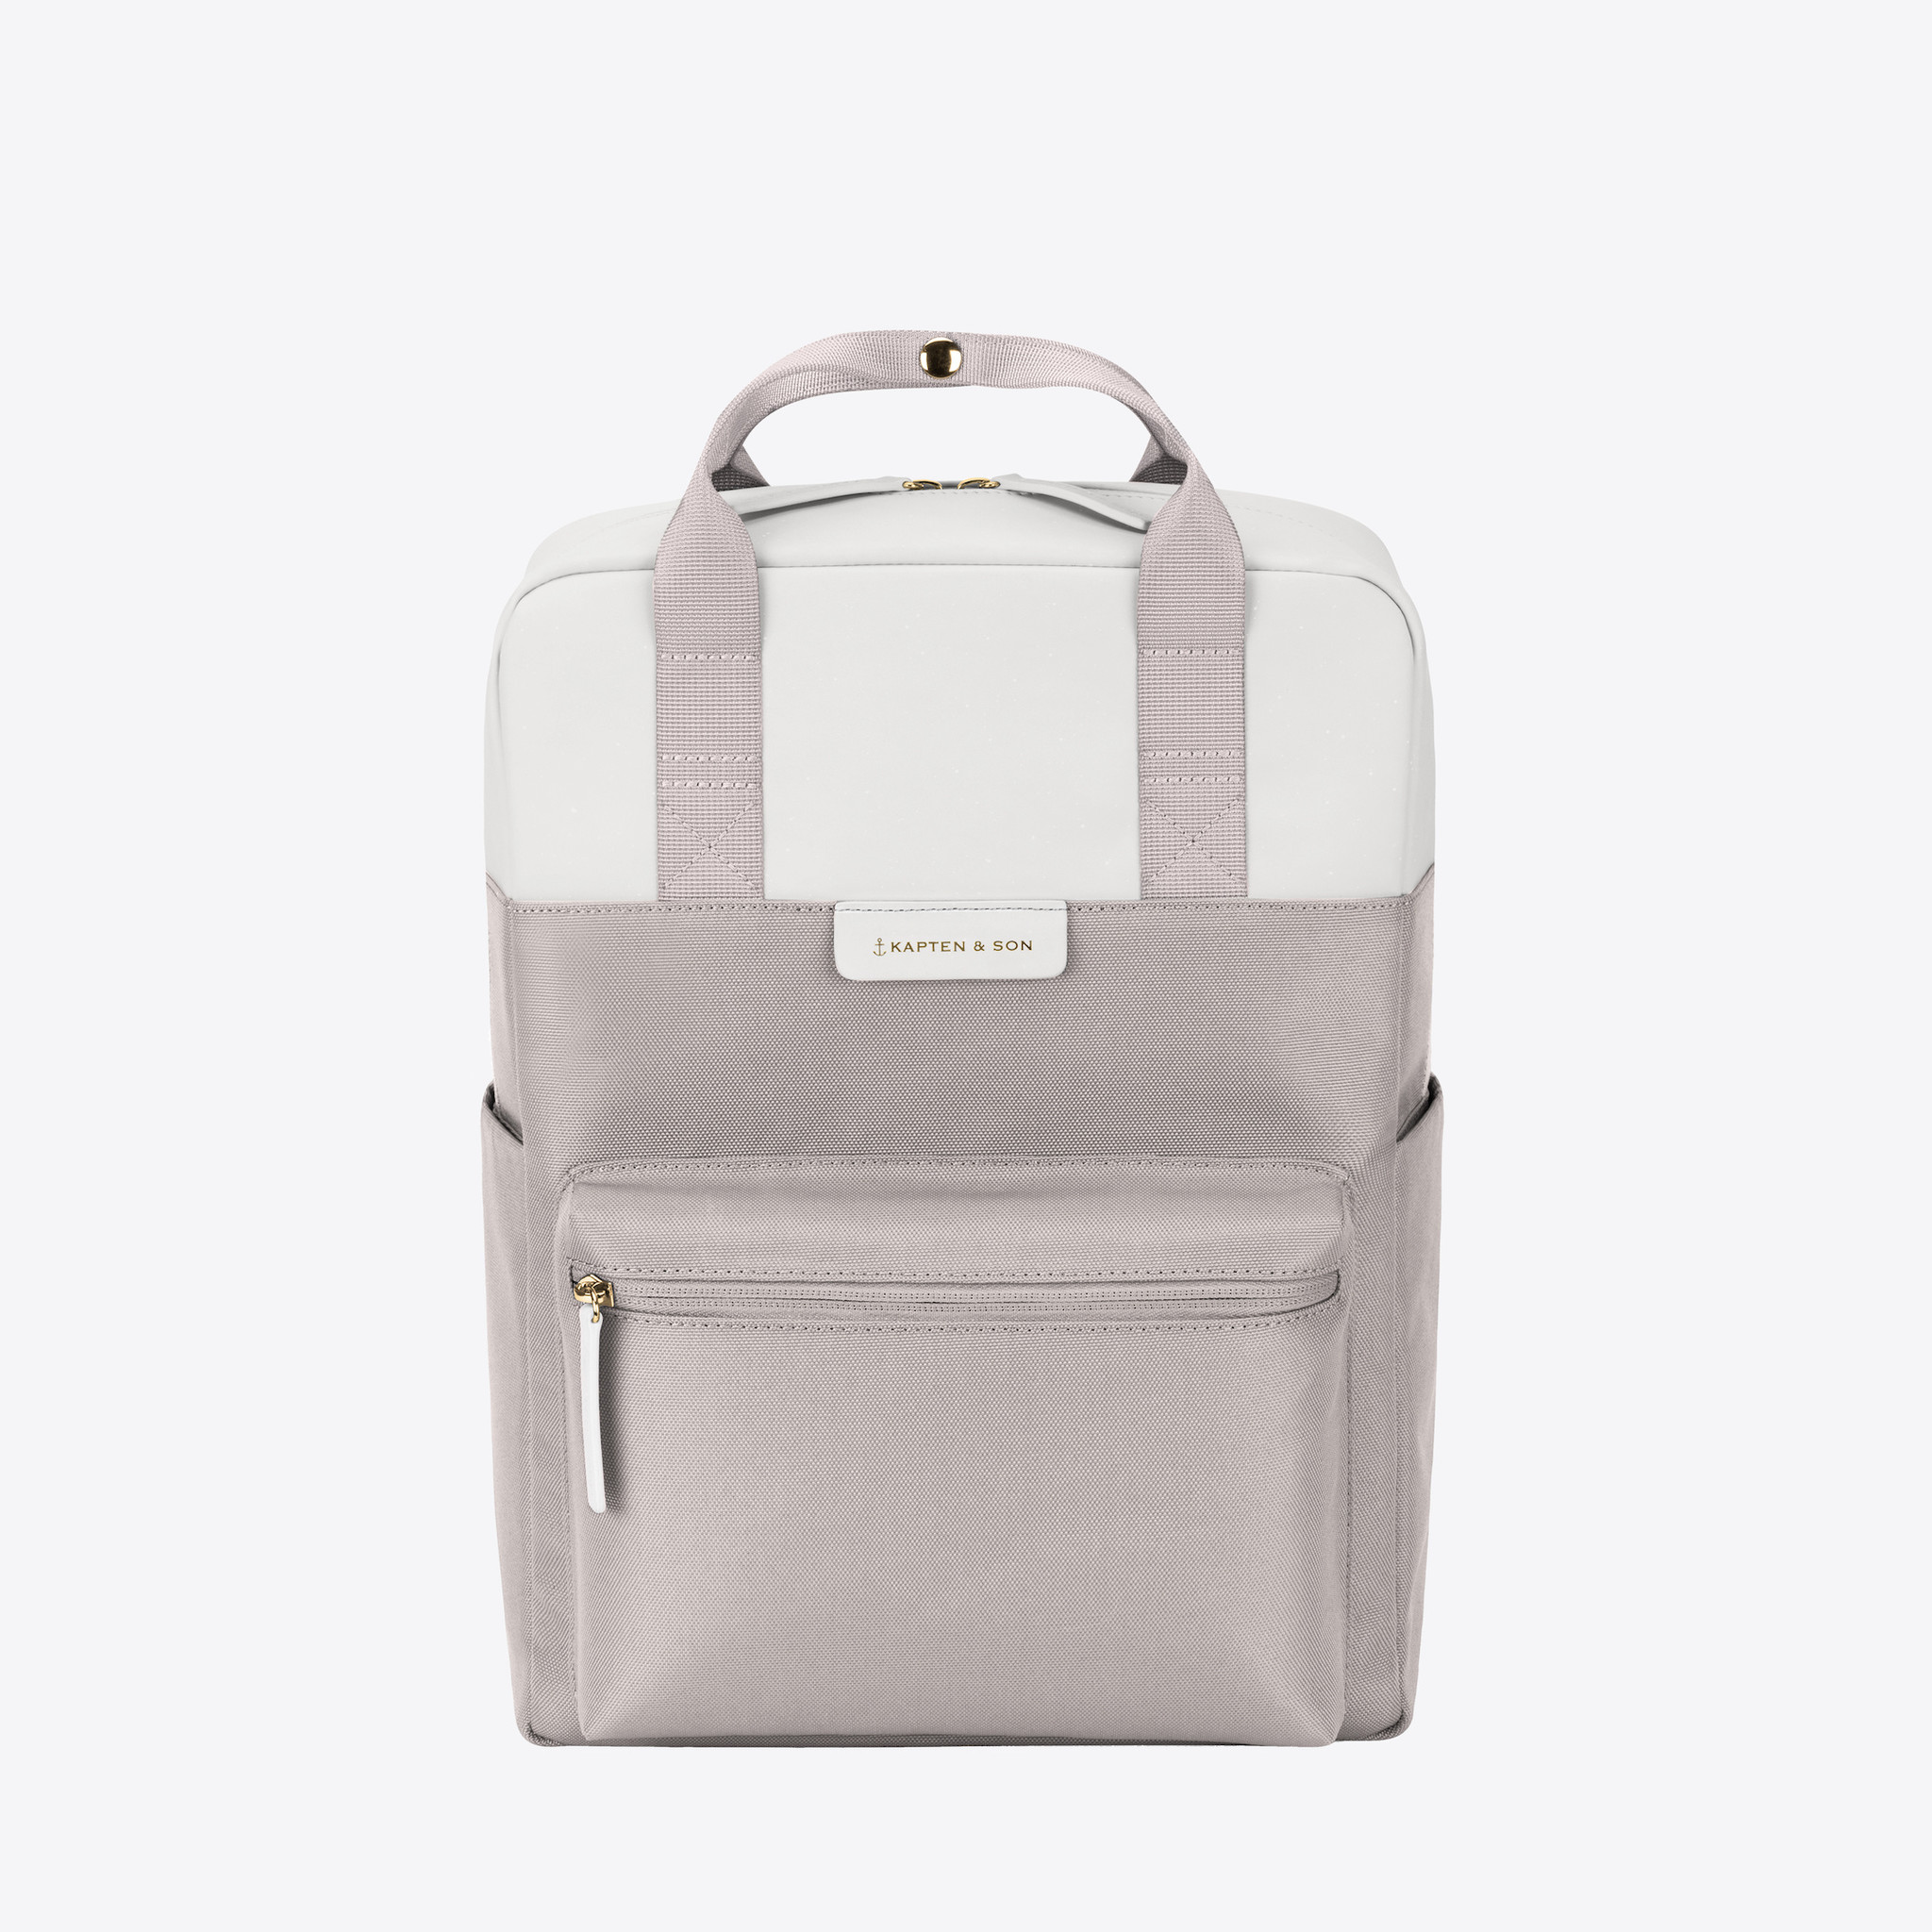 Kapten and Son Bergen Muted Clay Sprinkled Backpack - FREE 24h delivery ...